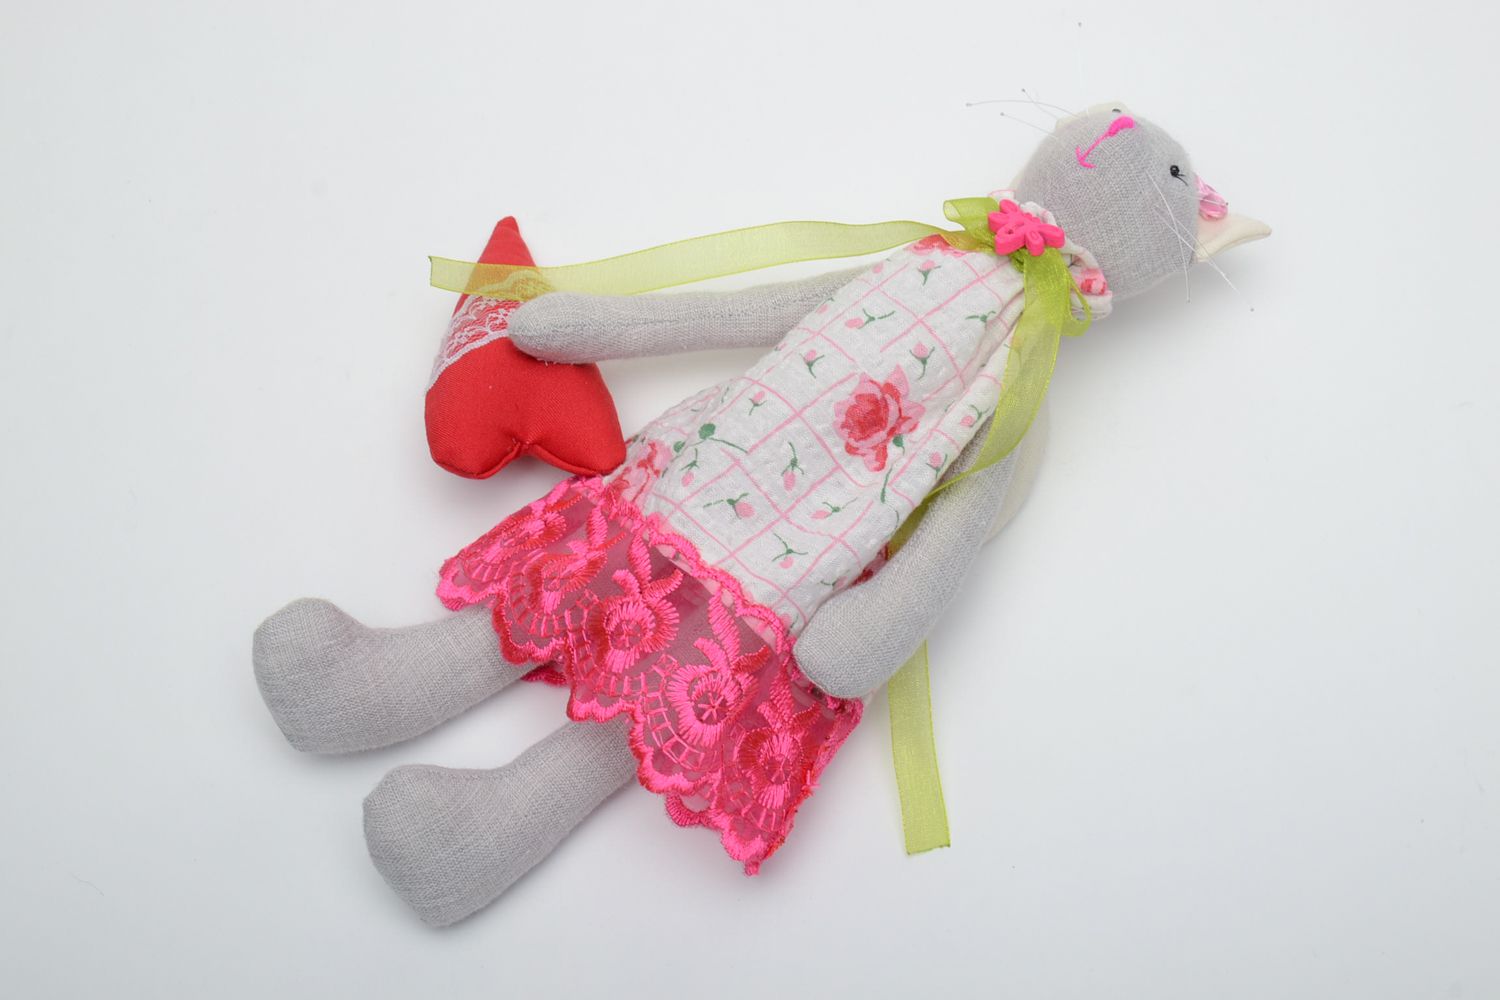 Fabric toy kitty in dress photo 2